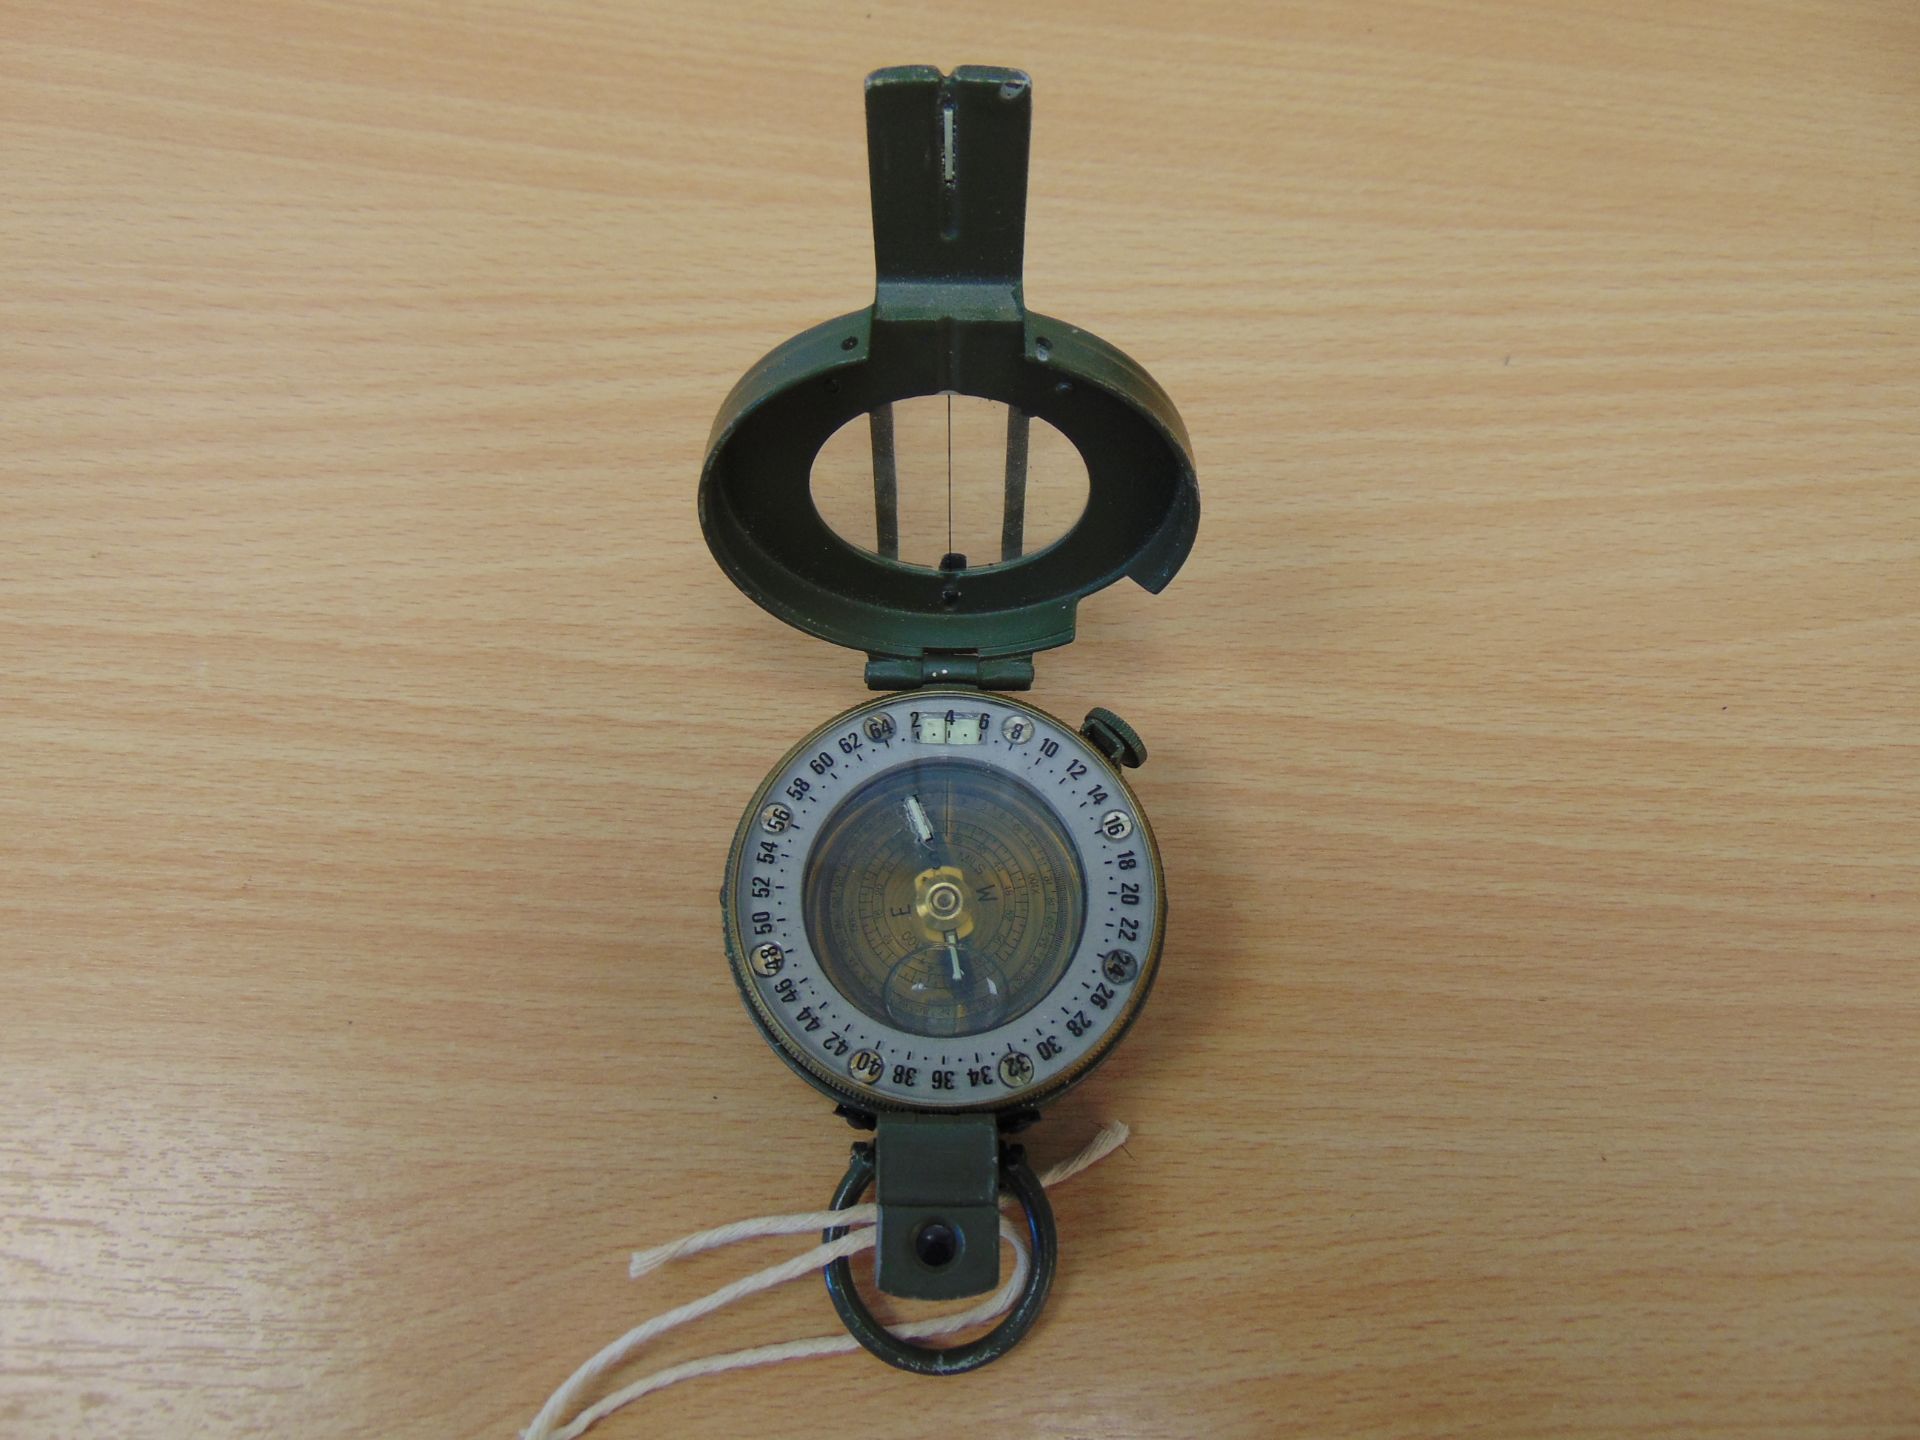 Stanley London British Army Prismatic Compass in mils, Nato marks - Image 3 of 4